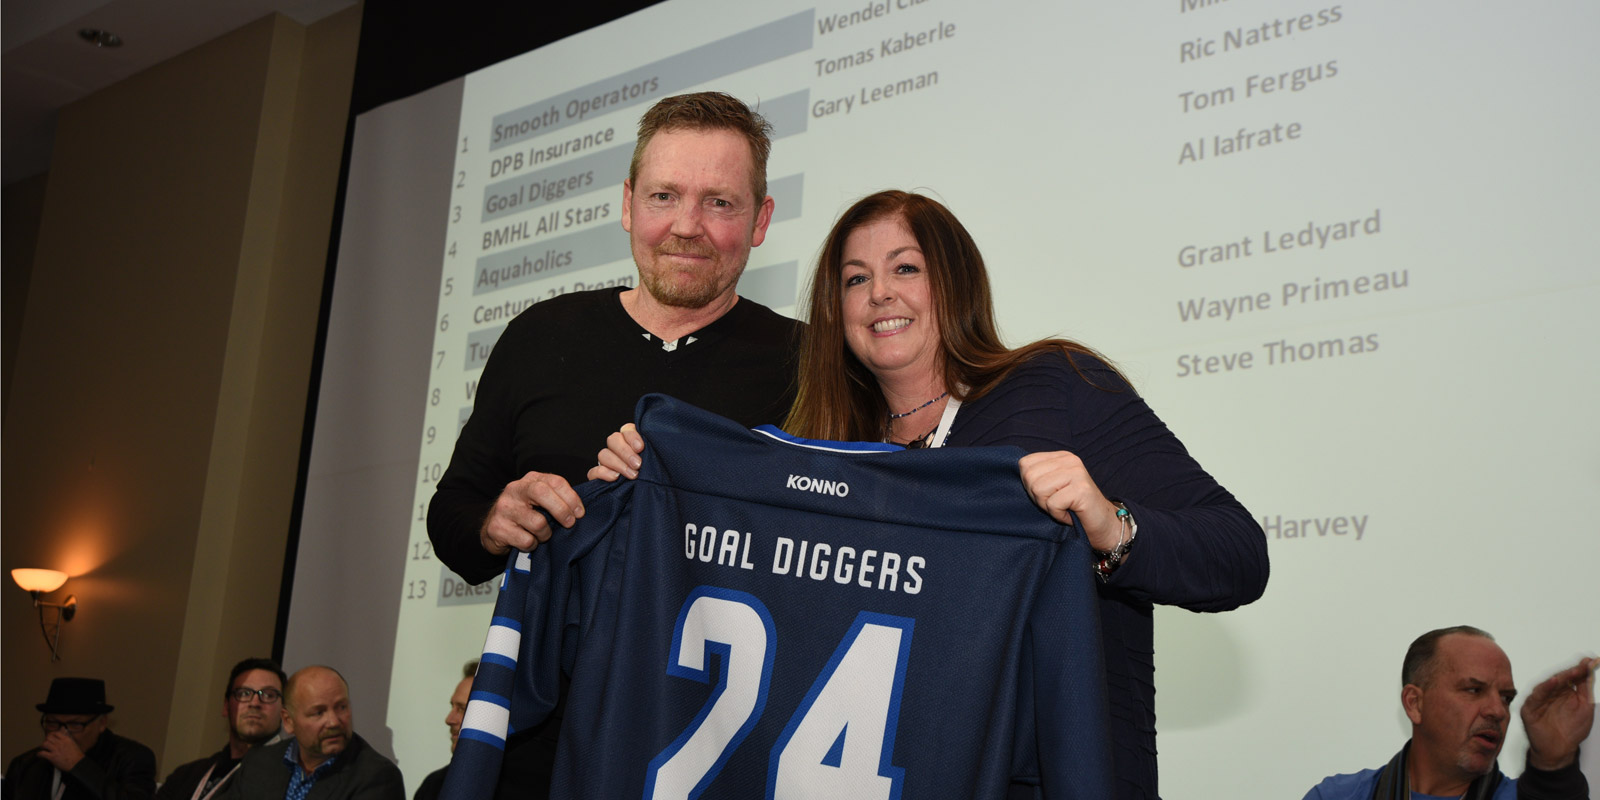 Gary Leeman accepts a jersey for the Goal Diggers at the draft party